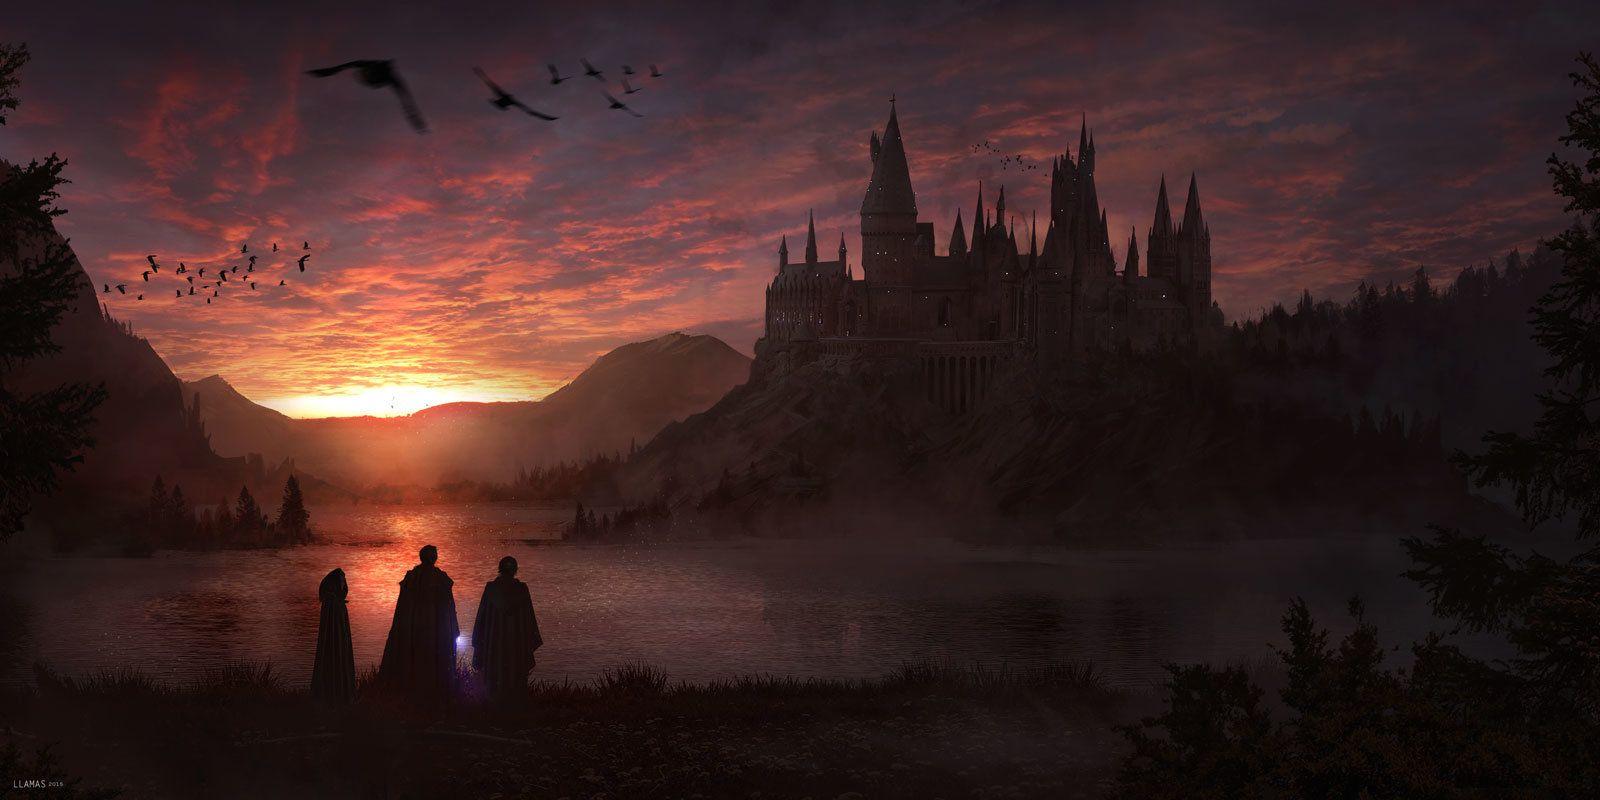 Featured image of post Hogwarts Desktop Wallpaper Harry Potter Harry potter hd wallpaper posted in mixed wallpapers category and wallpaper original resolution is 1600x900 px